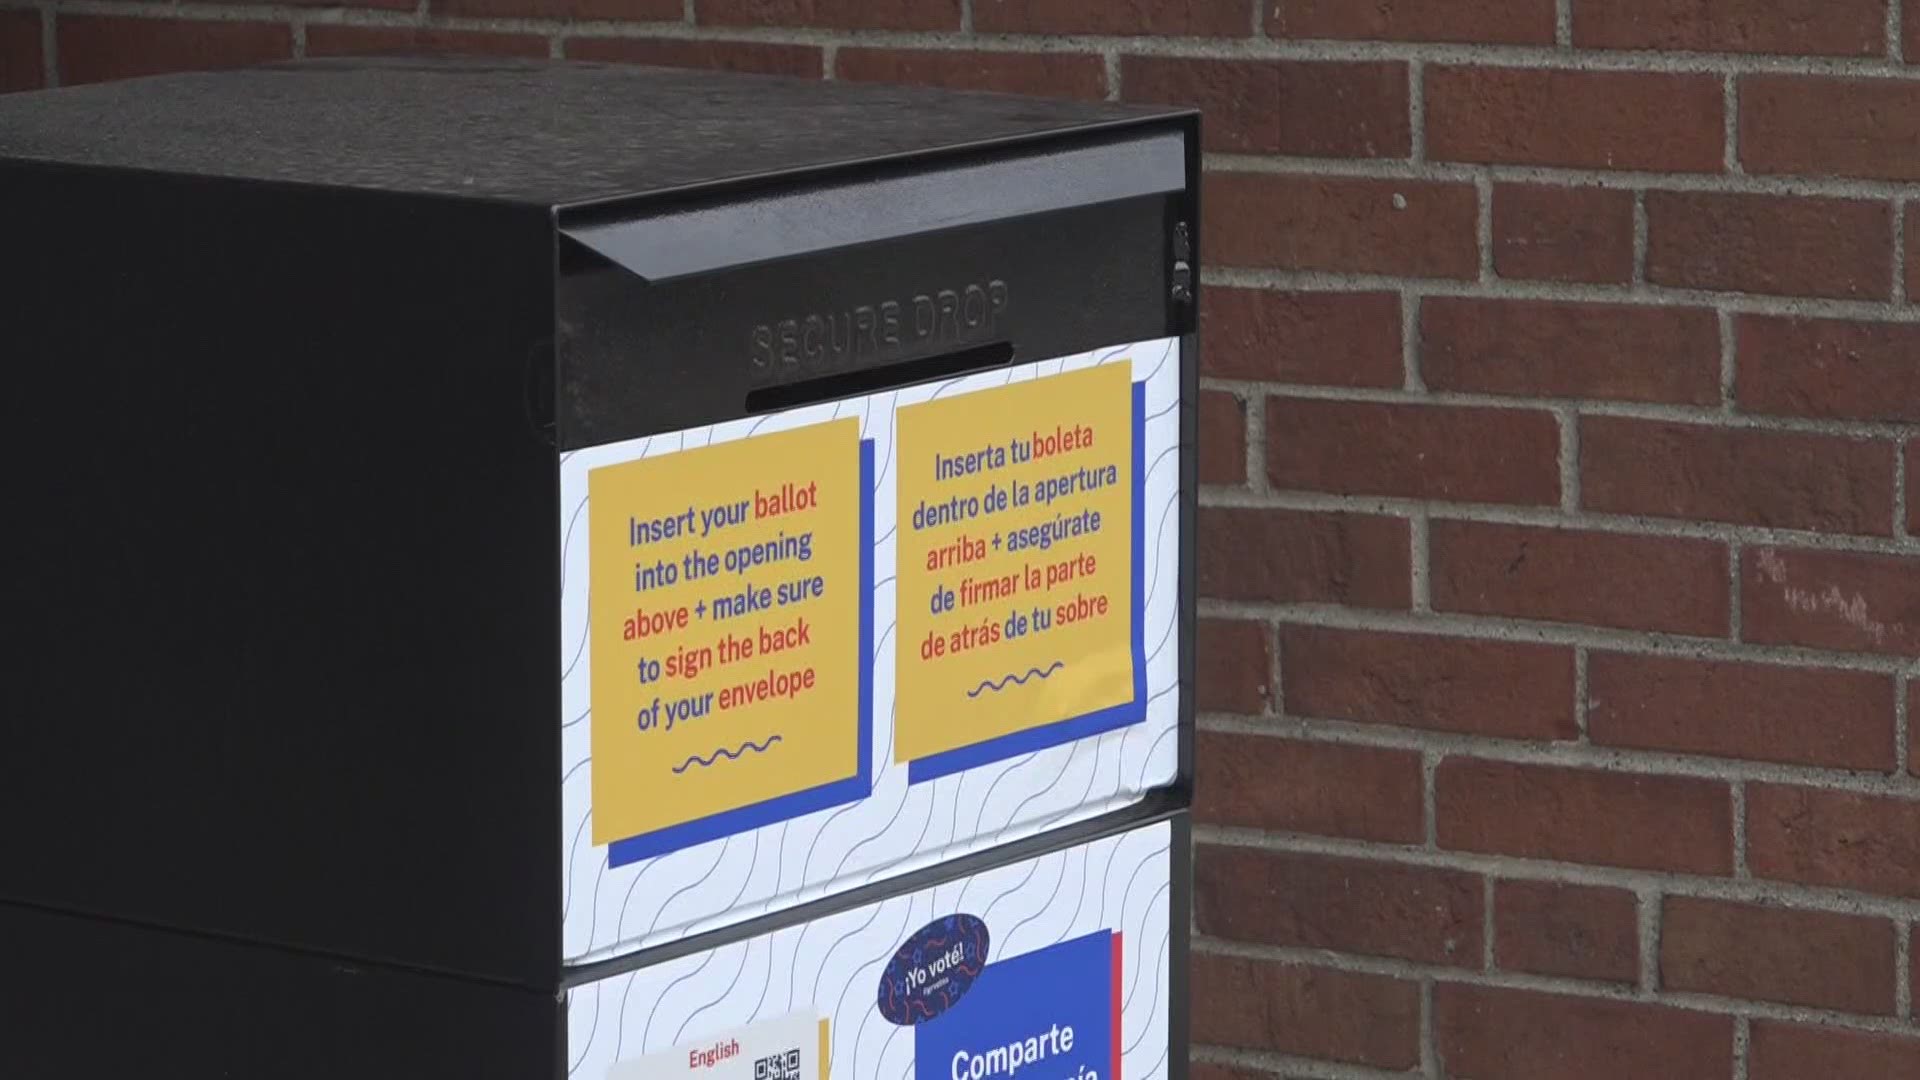 West Michigan clerks clear up absentee voting misconceptions and questions.